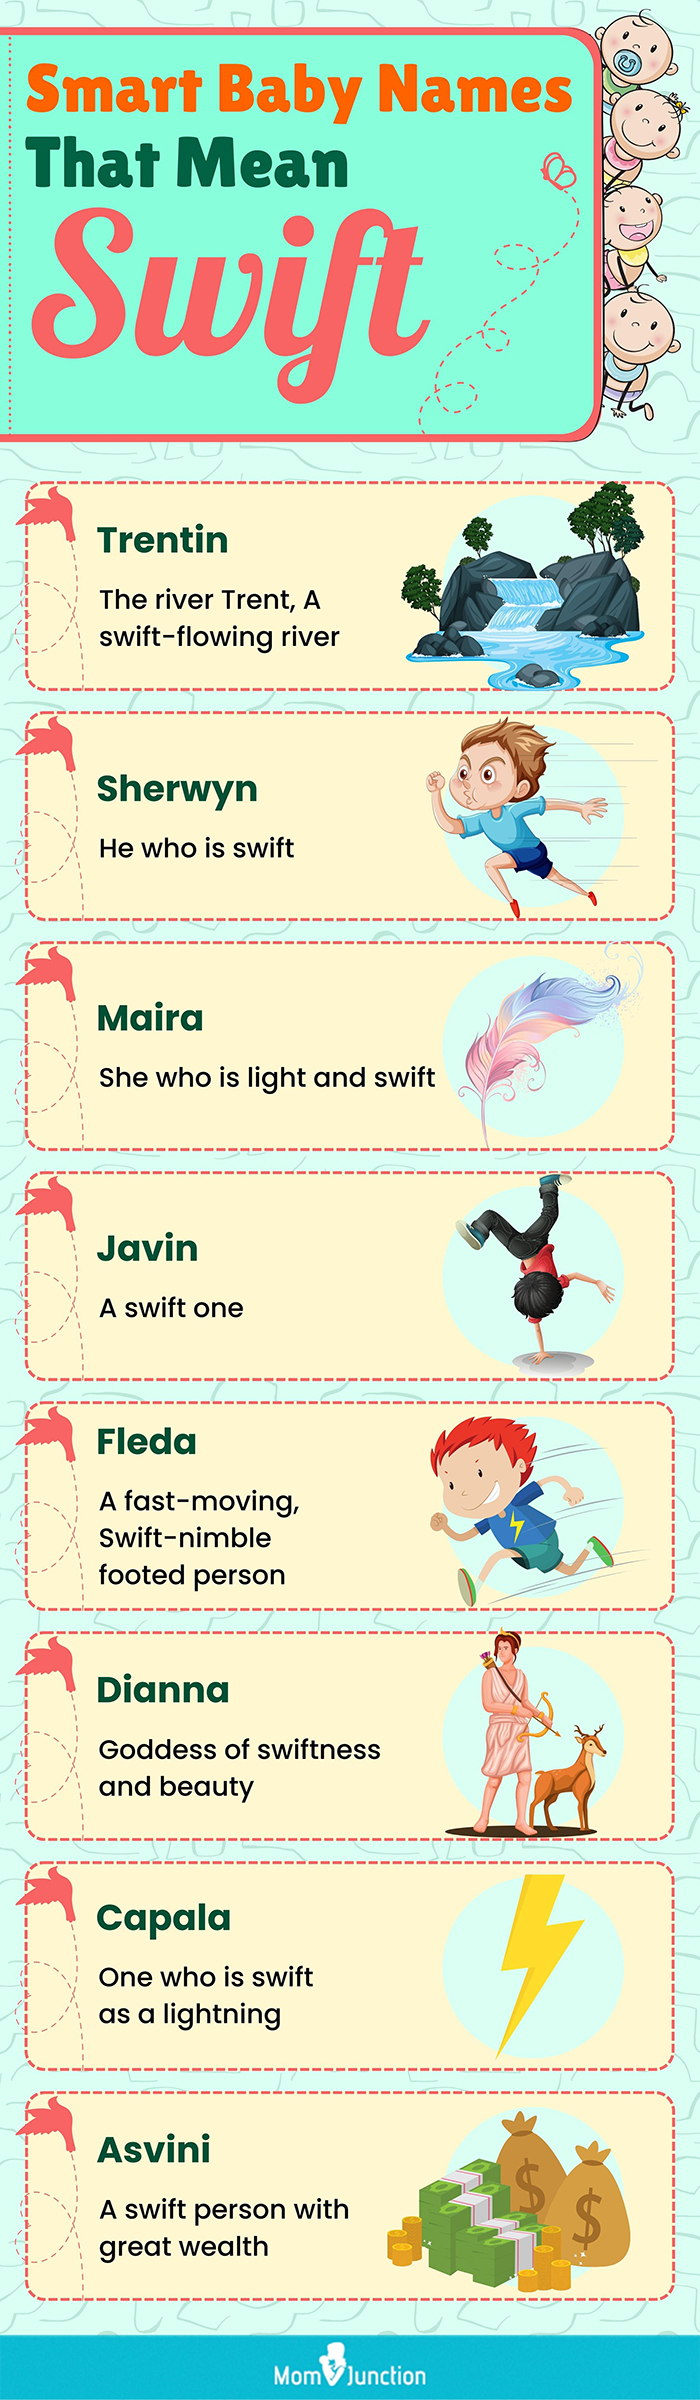 smart baby names that mean swift (infographic)